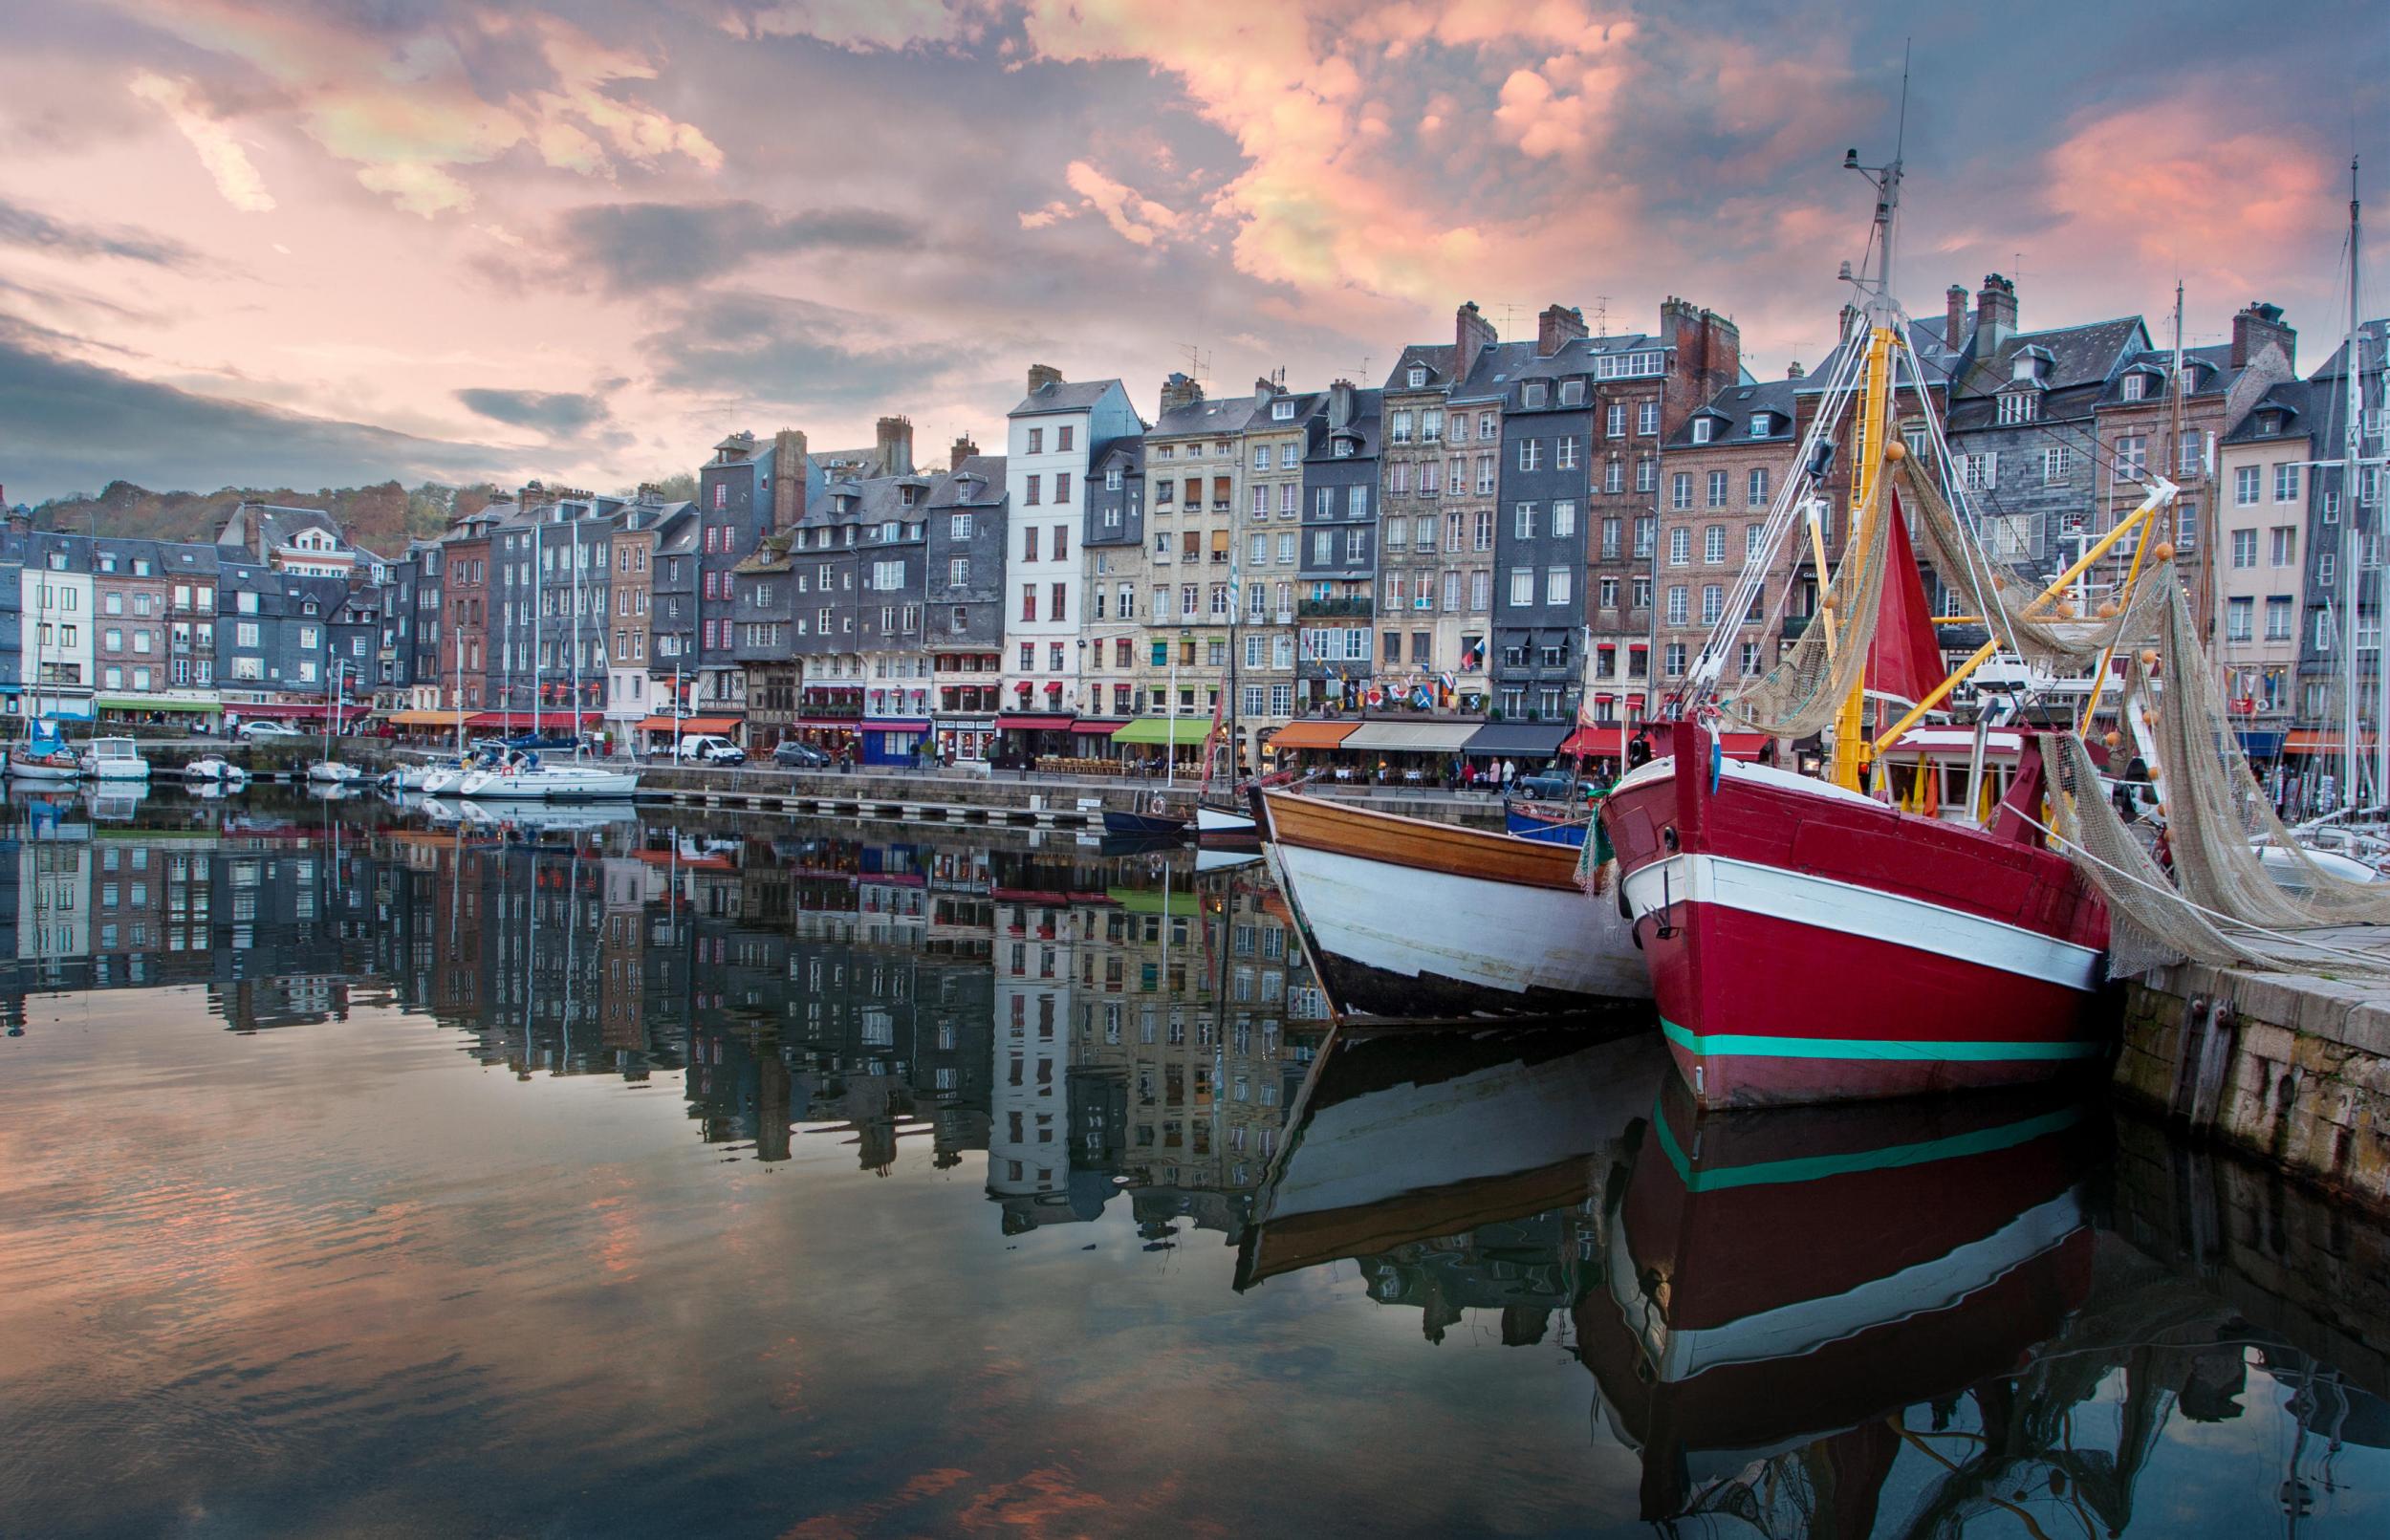 The port in Honfleur